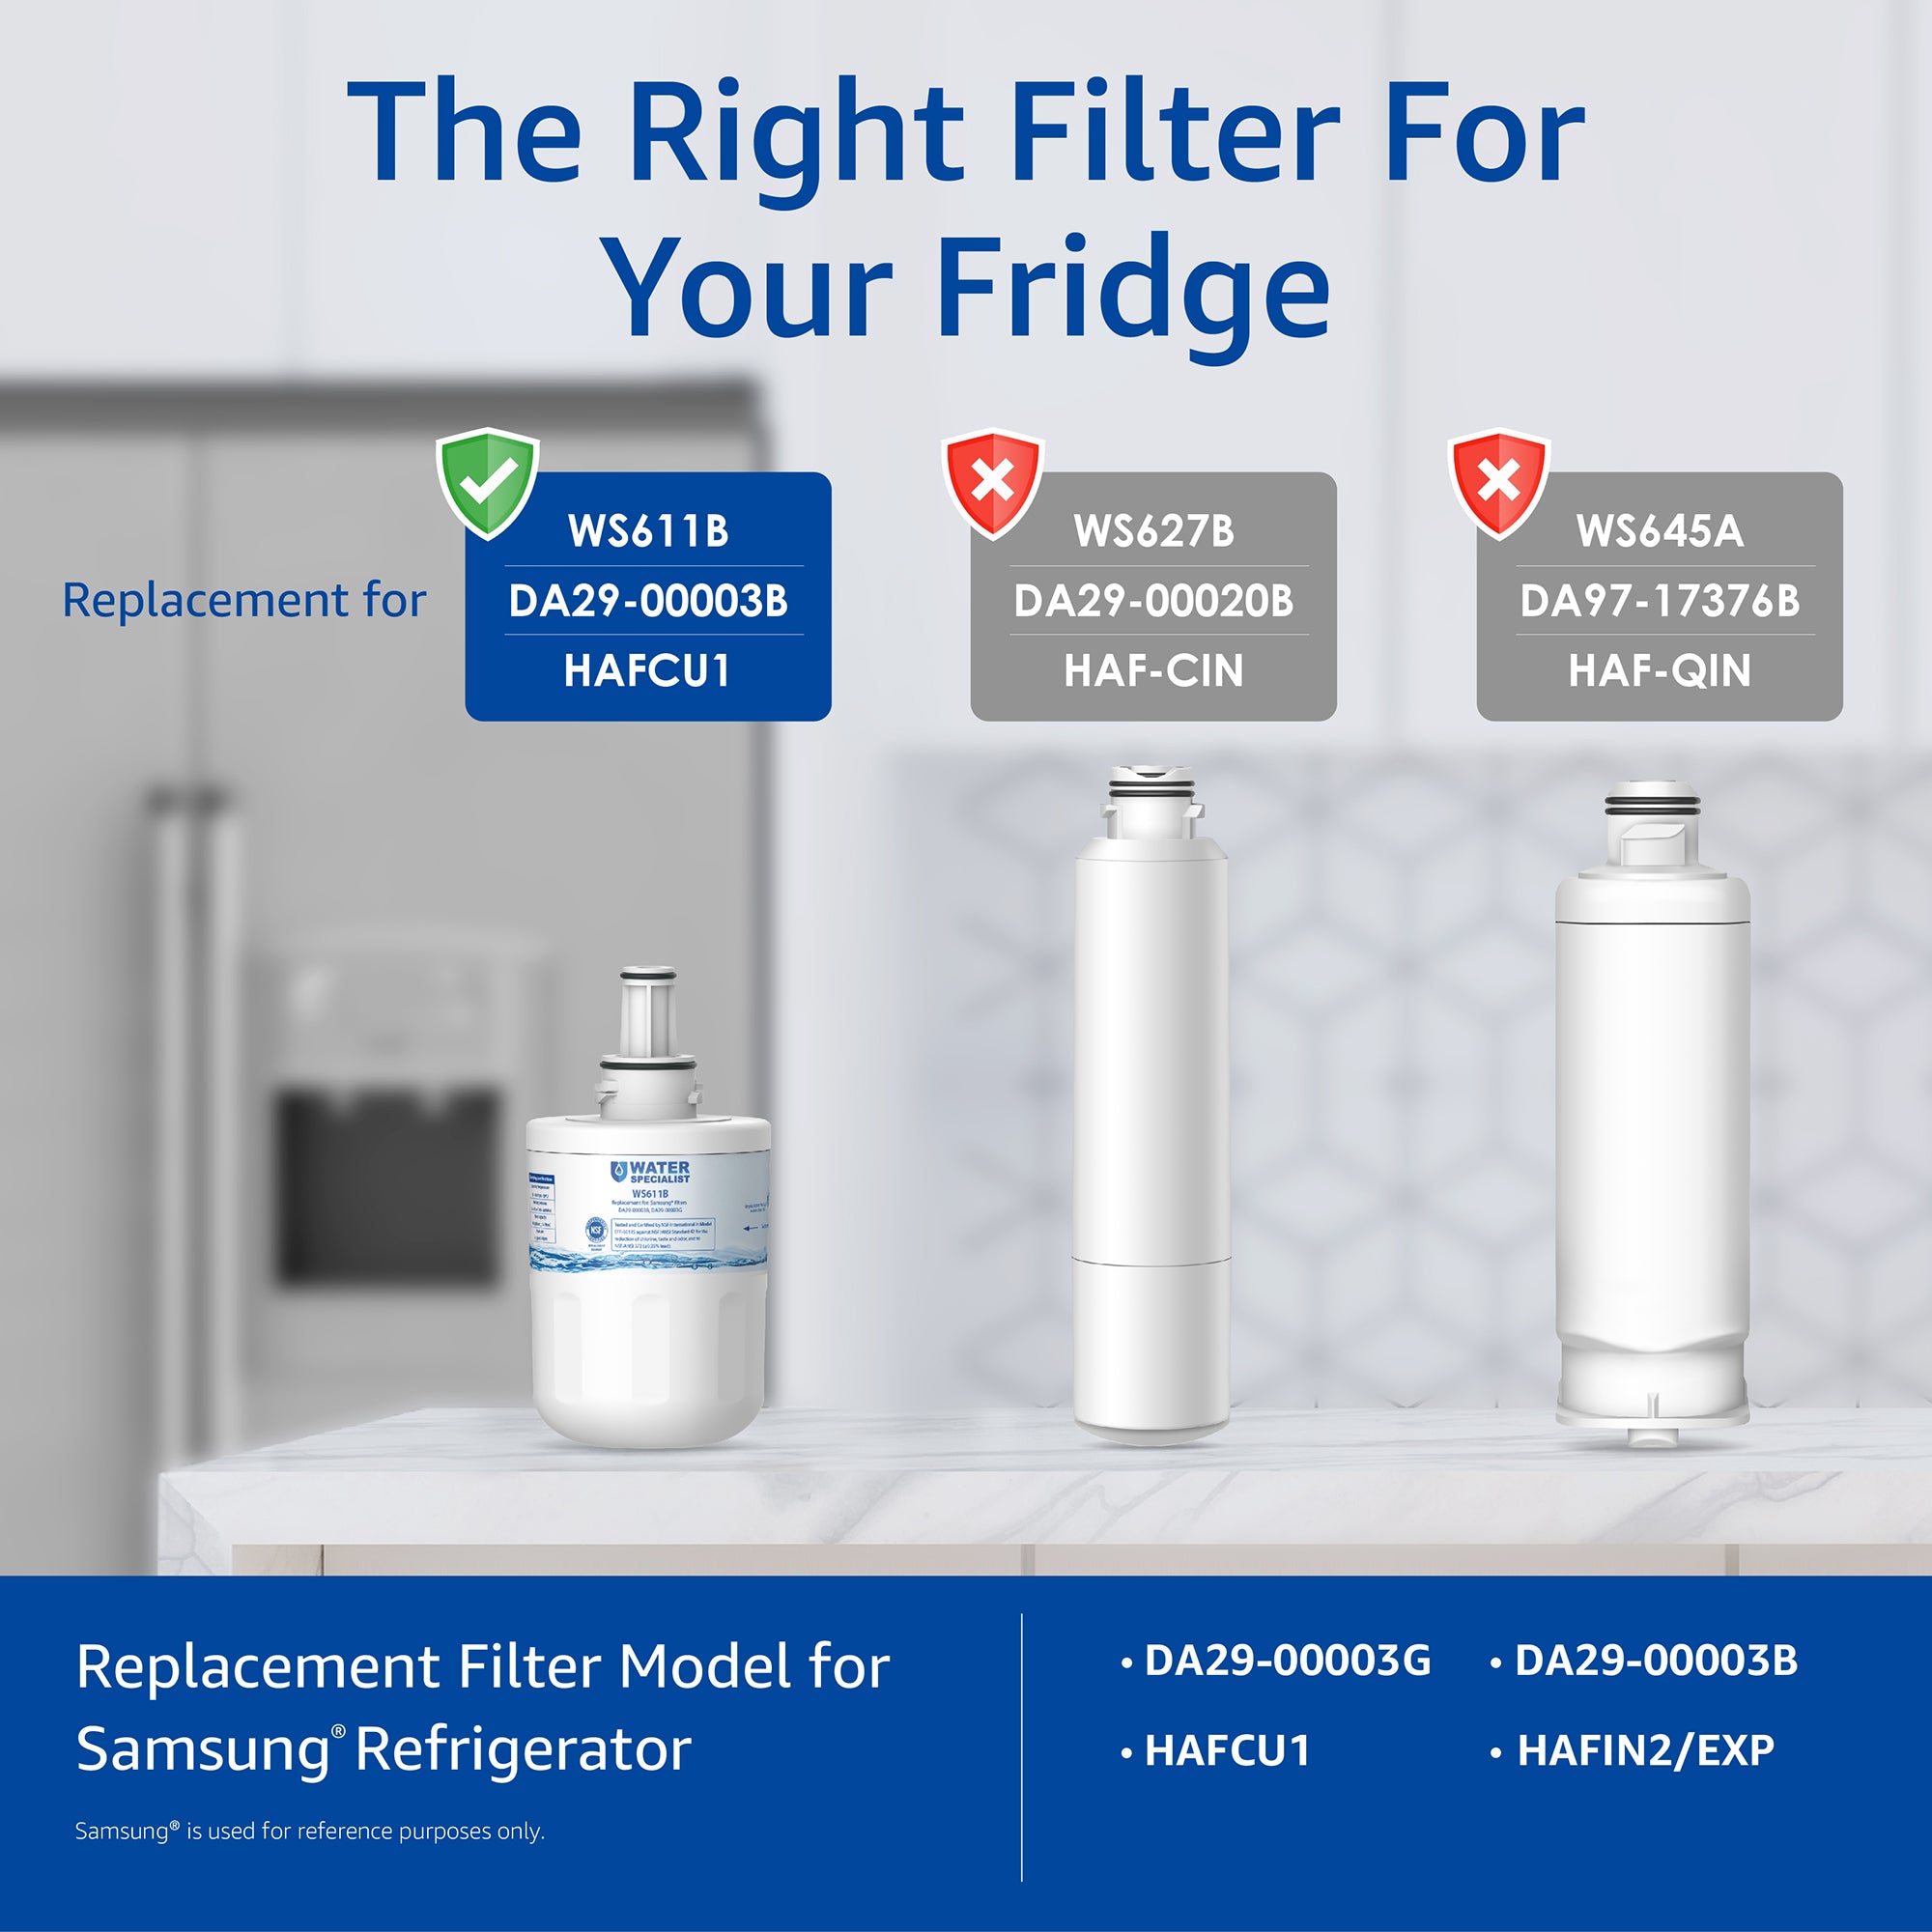 Waterspecialist DA29-00003G Refrigerator Water Filter, Replacement for Samsung DA29-00003B, RSG257AARS, RFG237AARS, HAFCU1, RS22HDHPNSR, WSS-1, 2 Filters